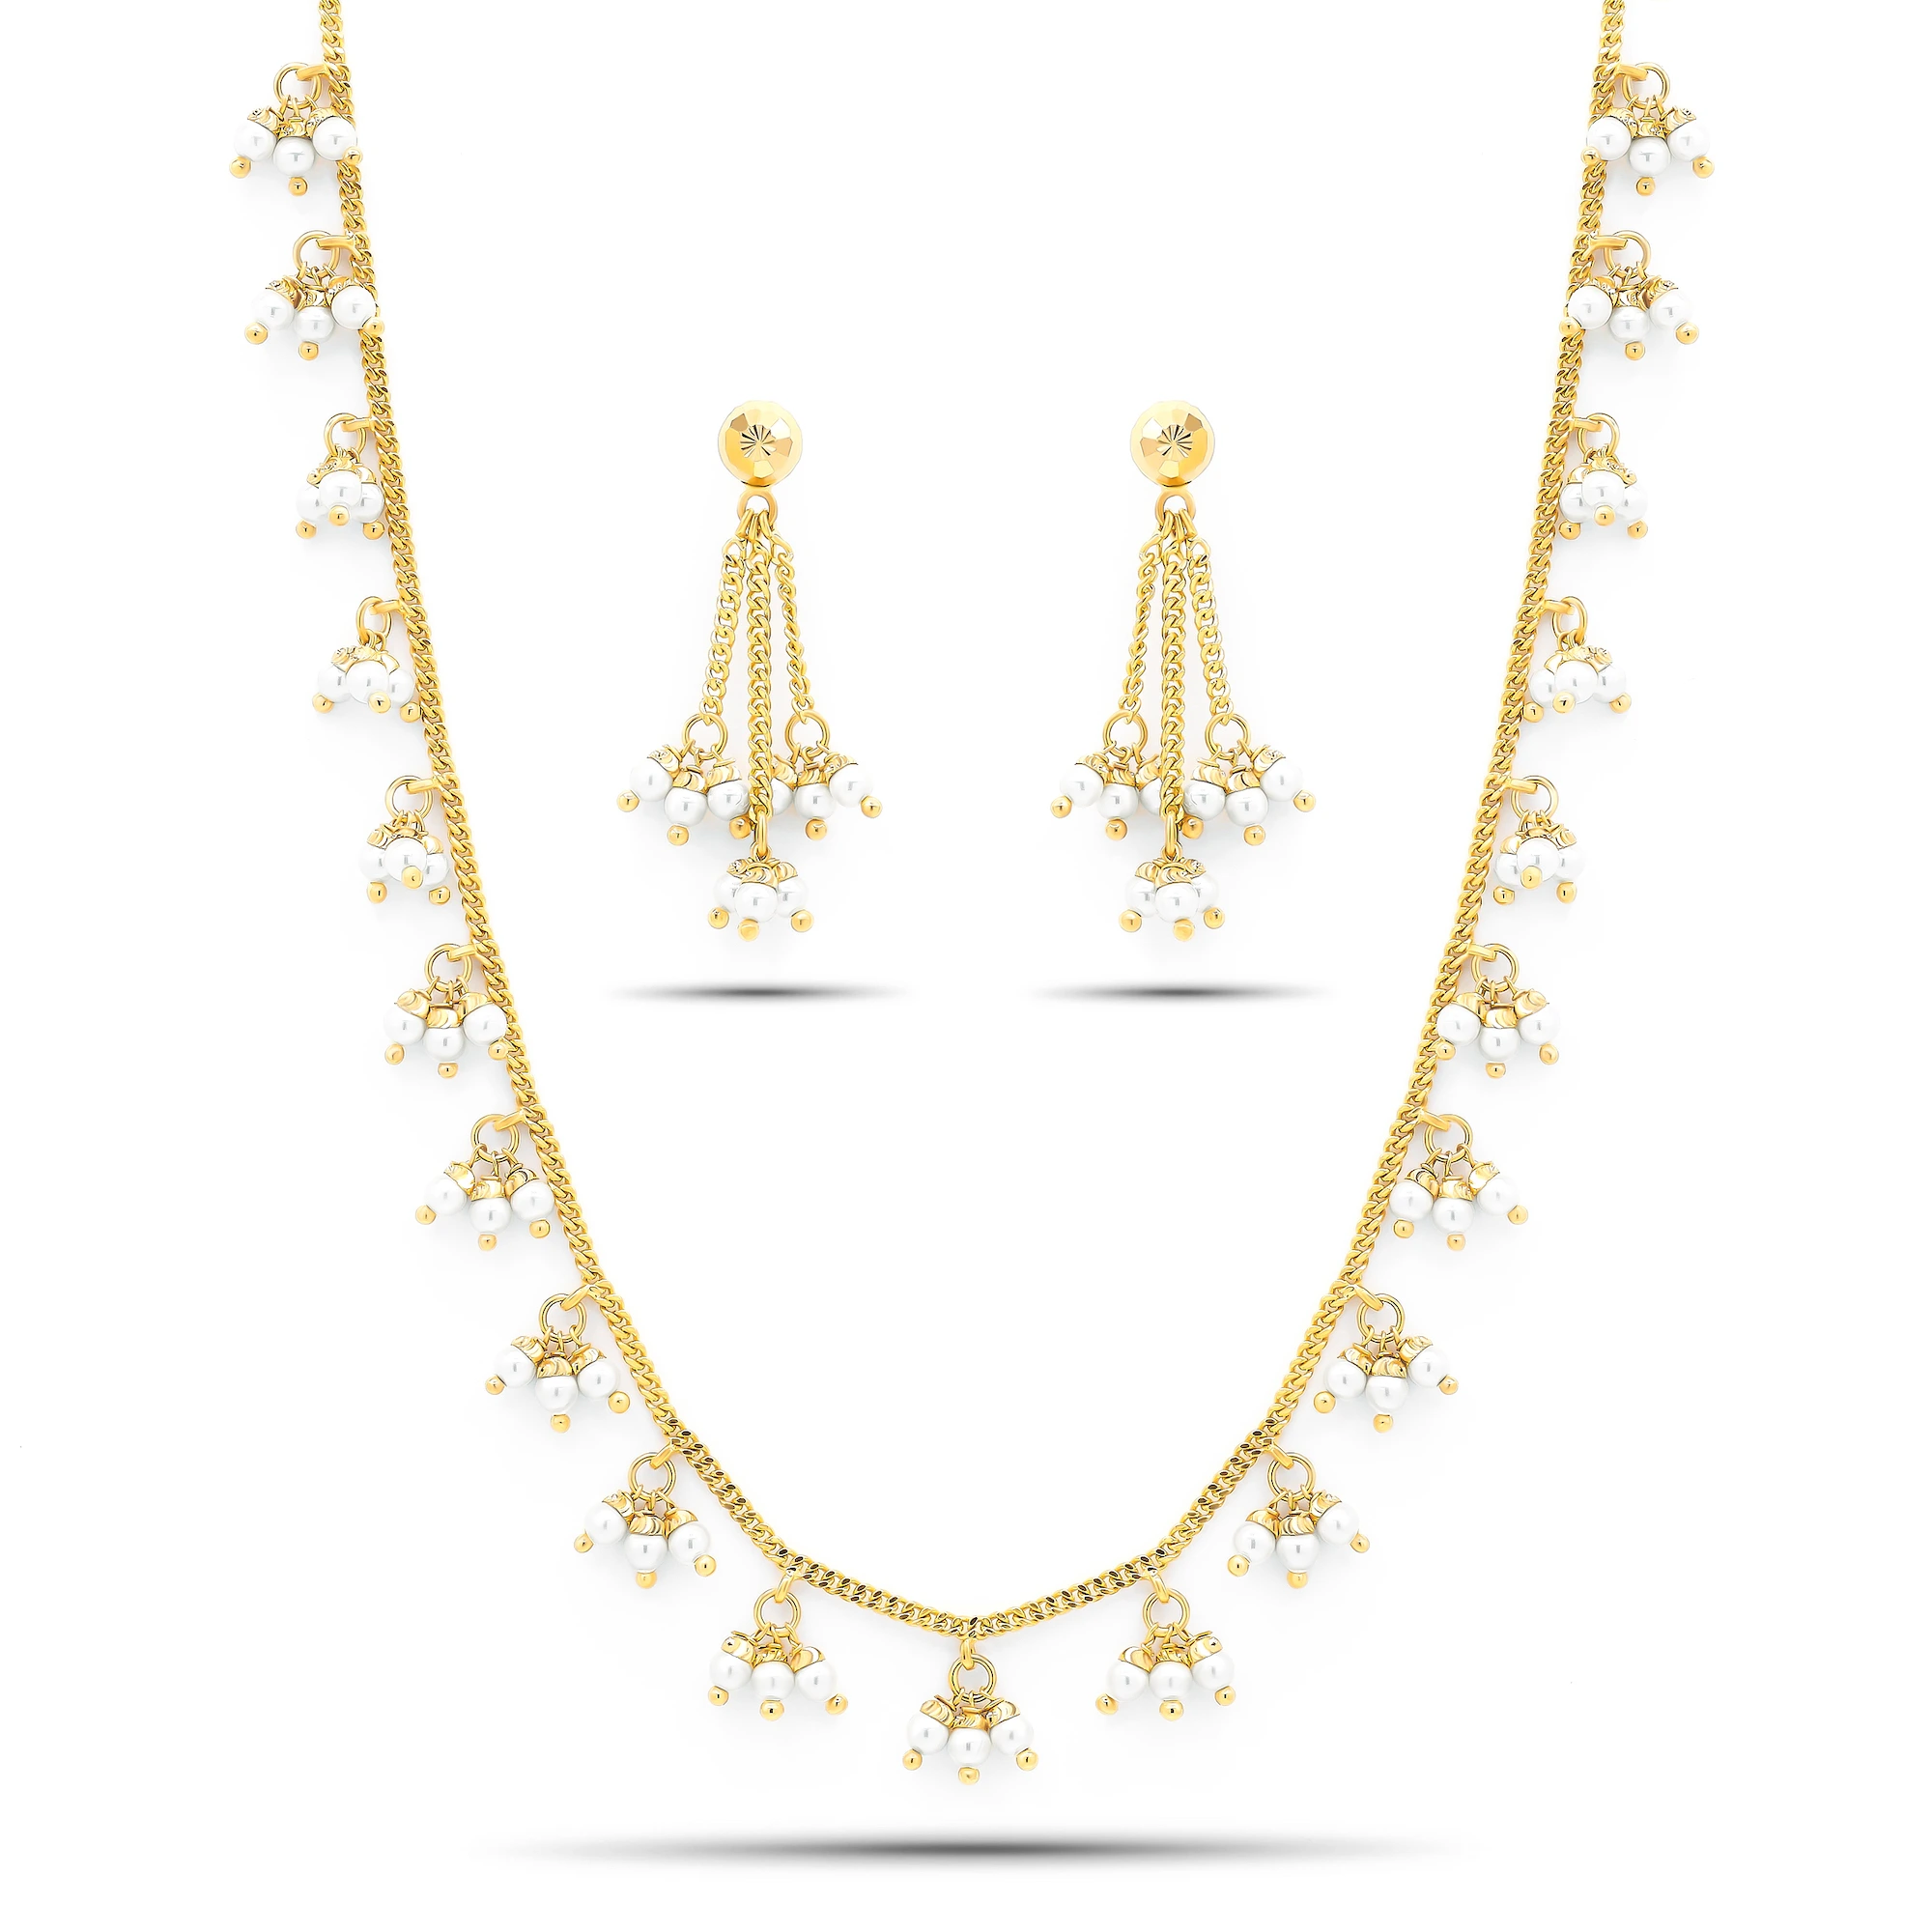 Gold Pearls Chain, Gold Pearls Set